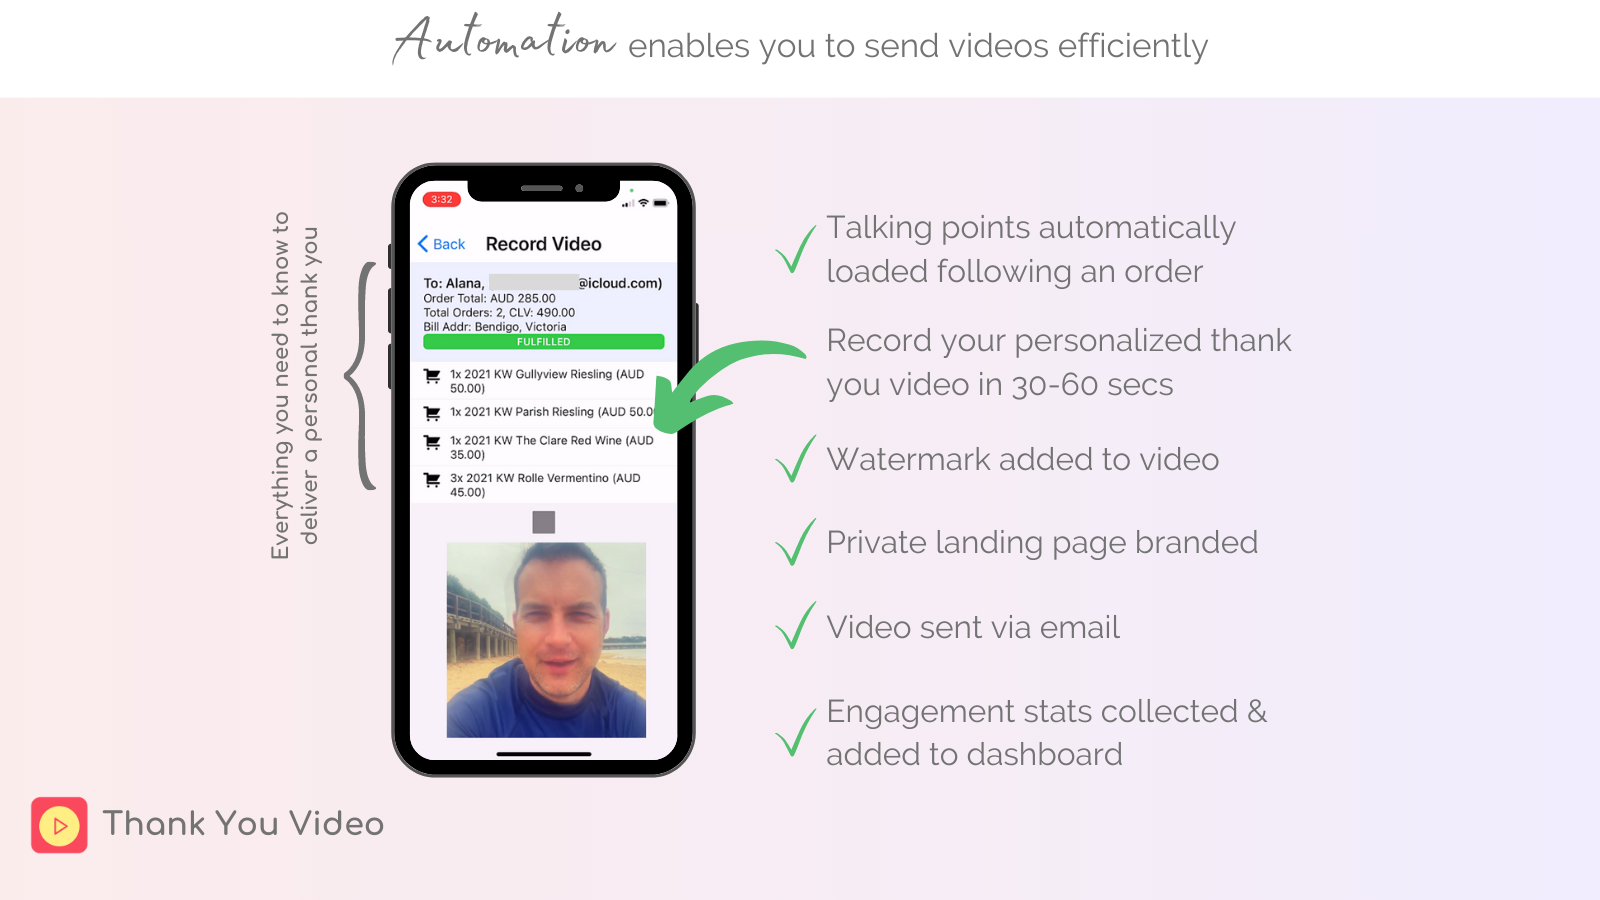 Automation enables you to send videos efficiently